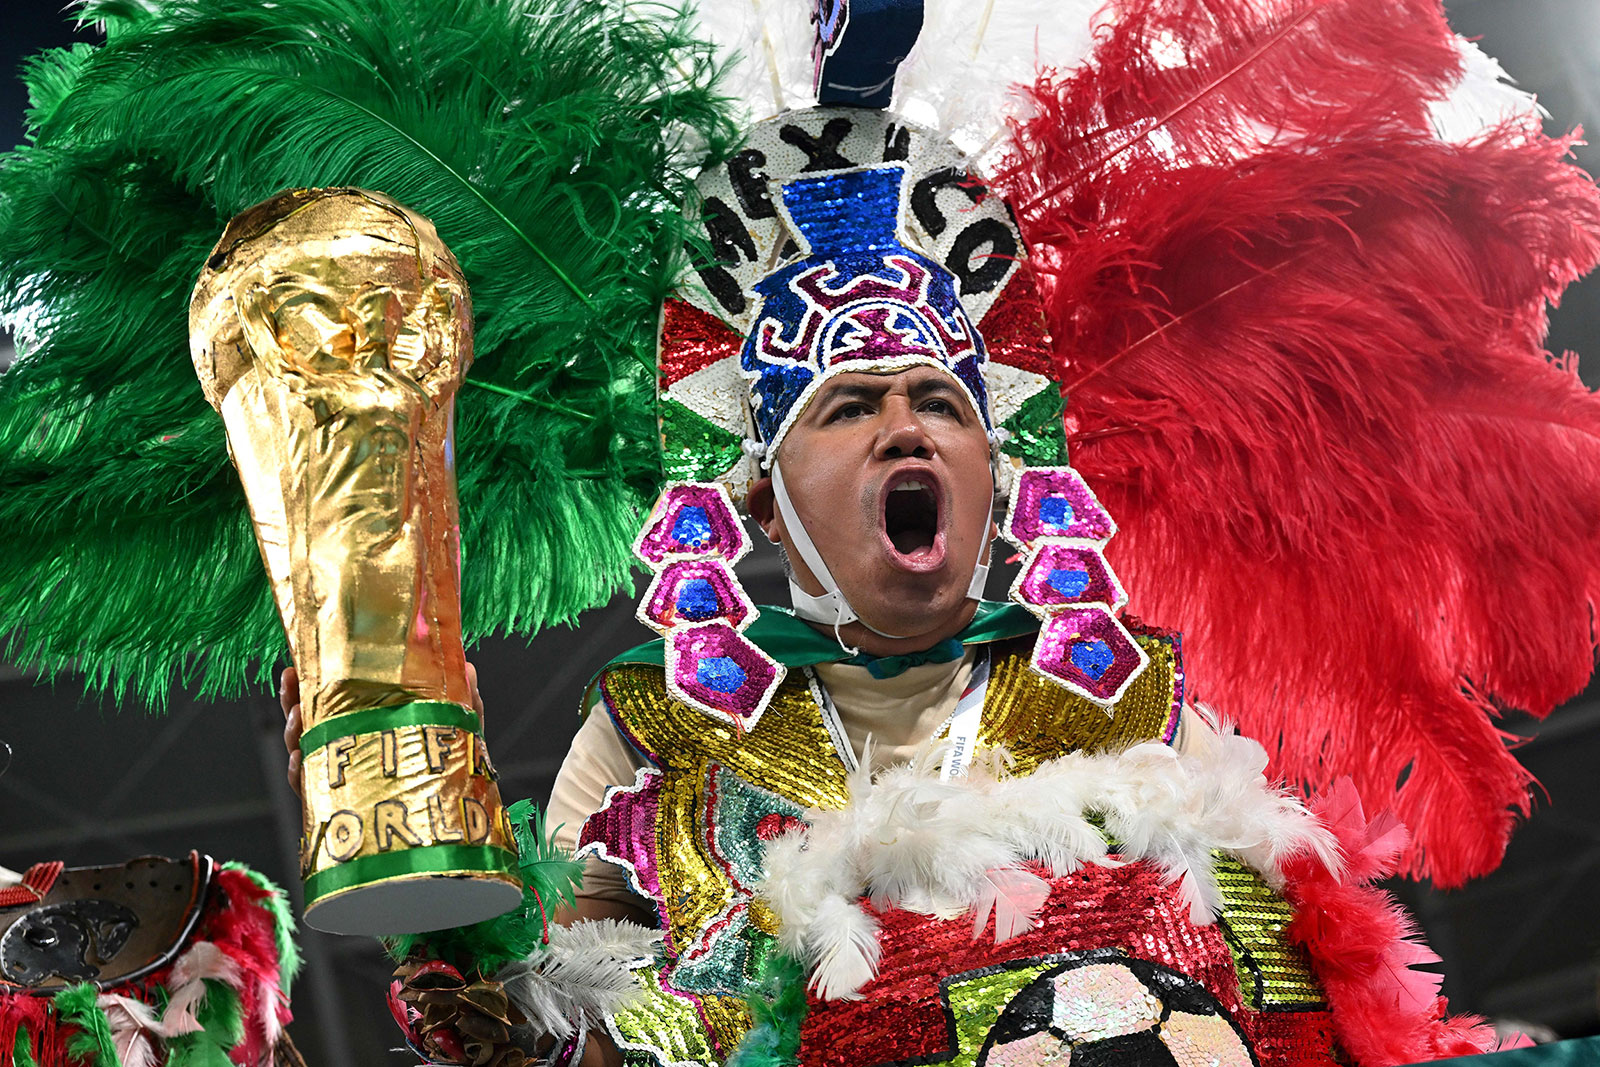 A Mexico fan cheers while holding a replica of the World Cup trophy ahead of the match between Mexico and Poland on November 22. 